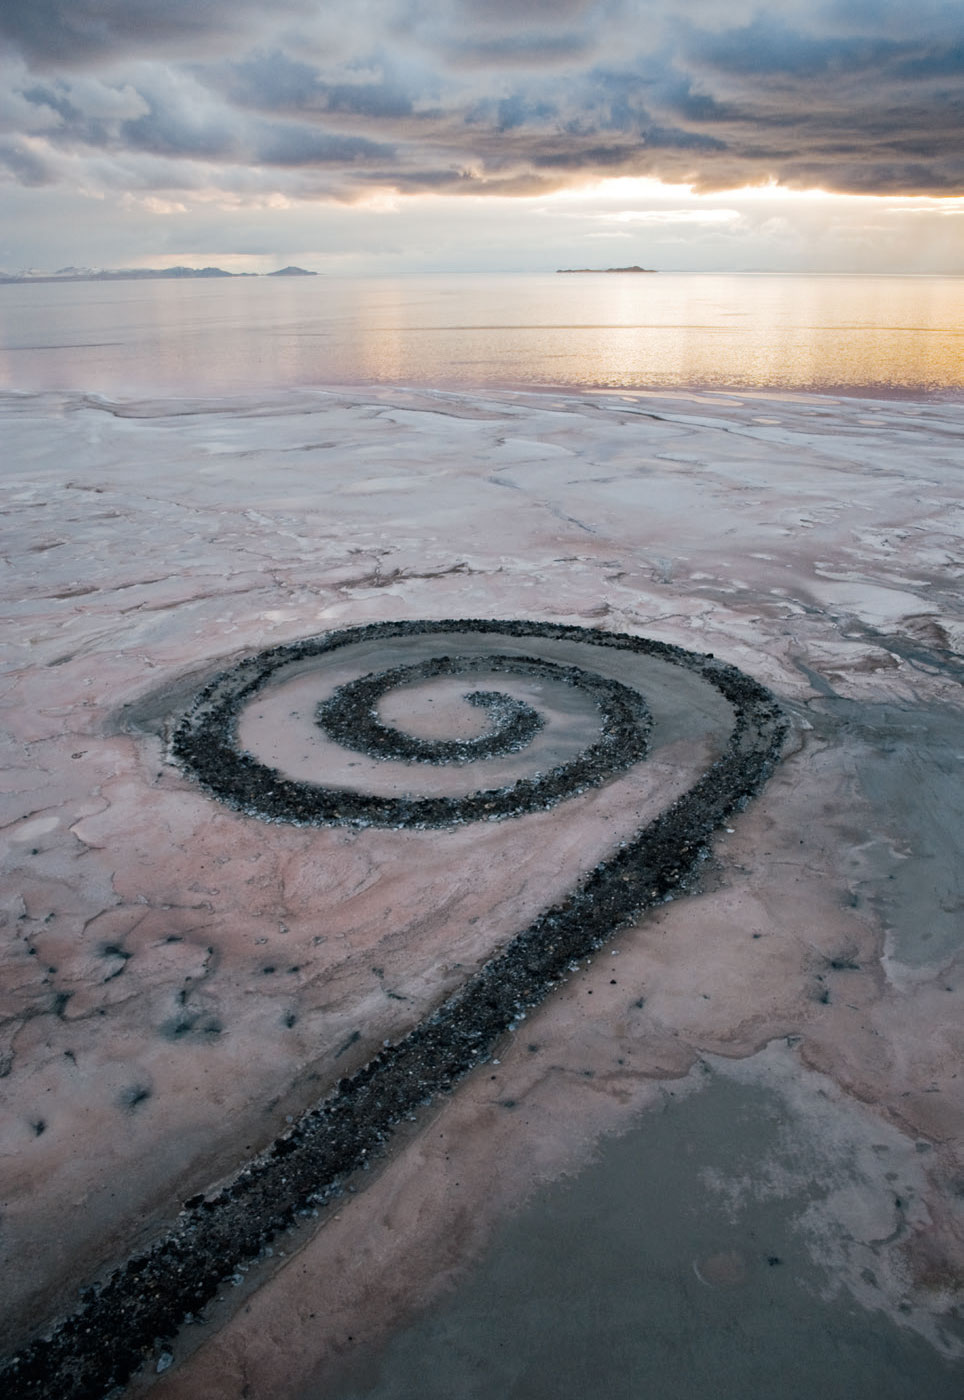 Spiral Jetty (1970) by Robert Smithson. As featured in Art & Place and Destination Art